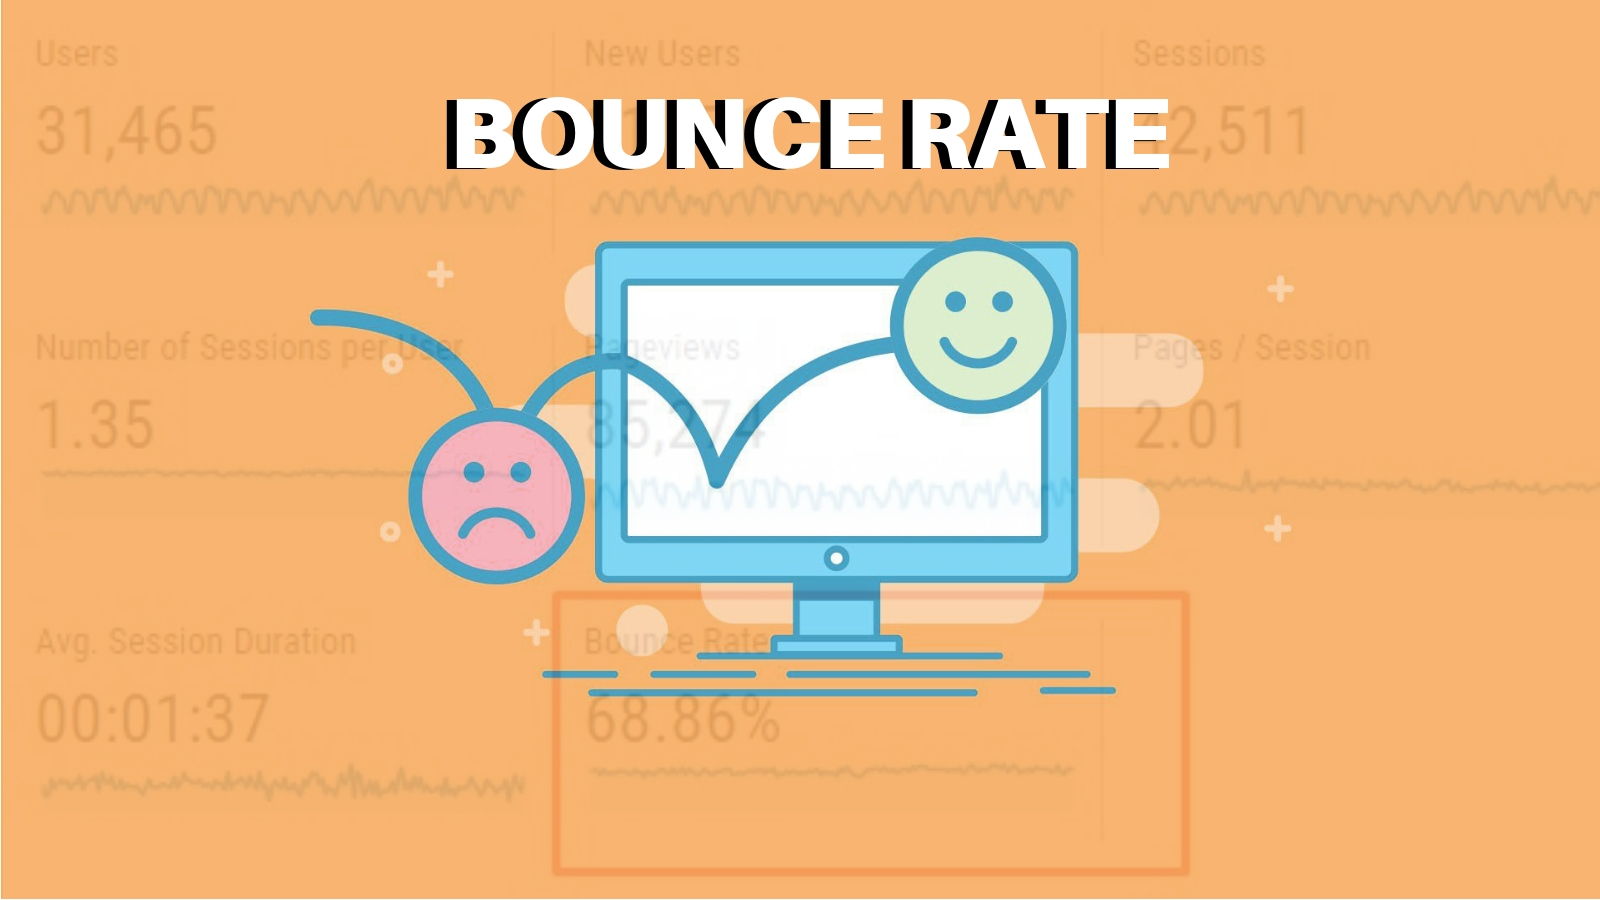 Measure bounce rate